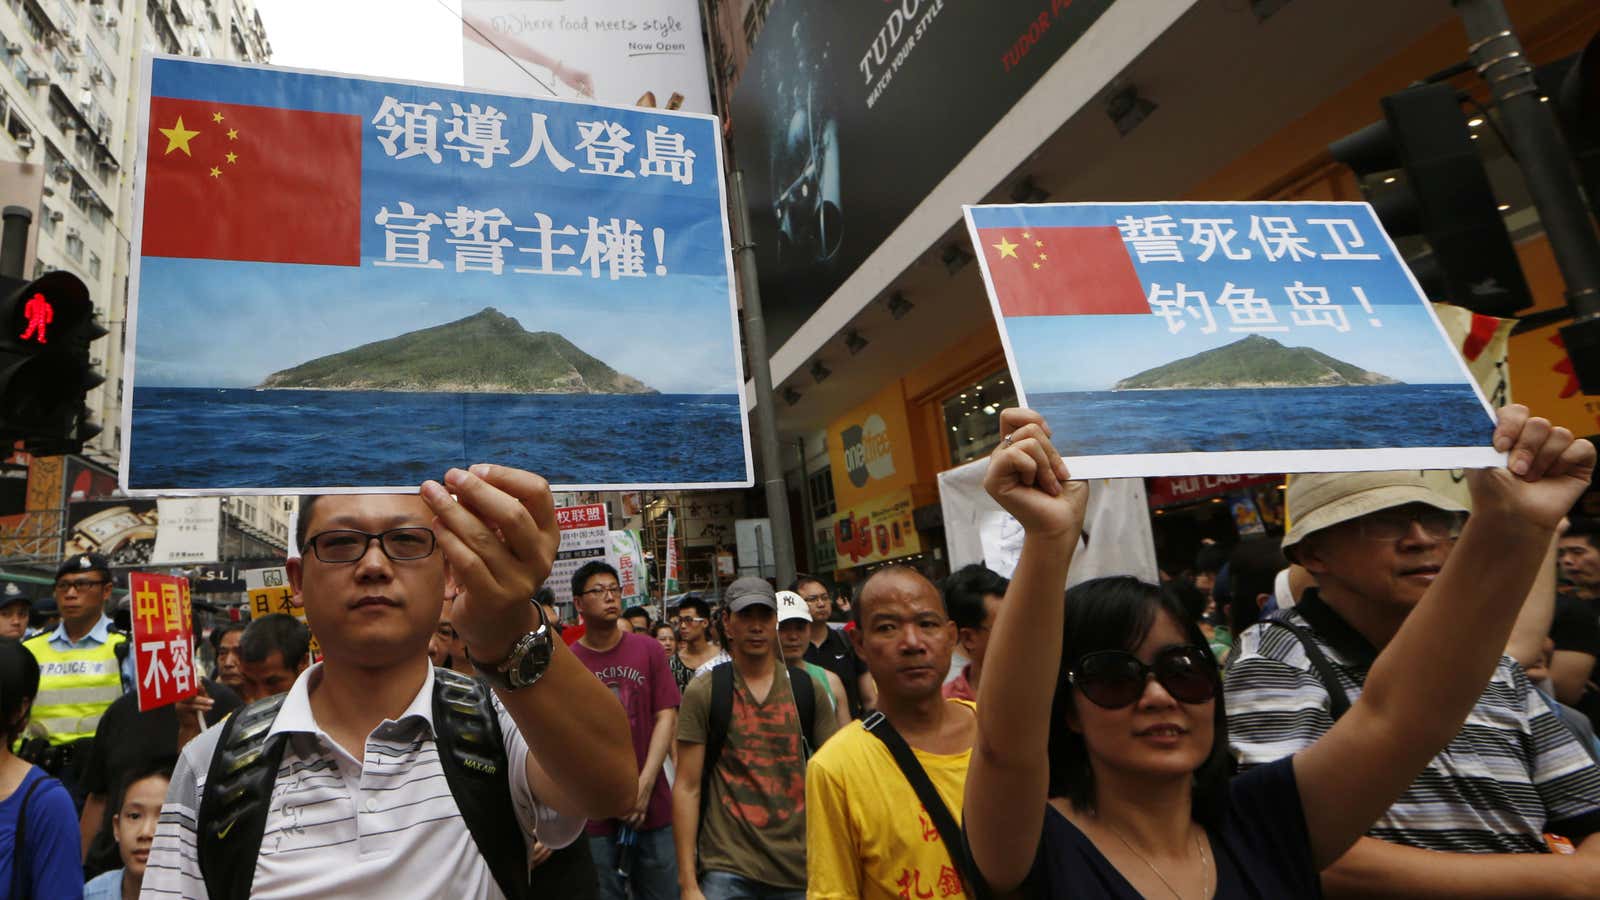 In Hong Kong, anti-Japanese protestors hld signs of disputed islands in South China Seas.